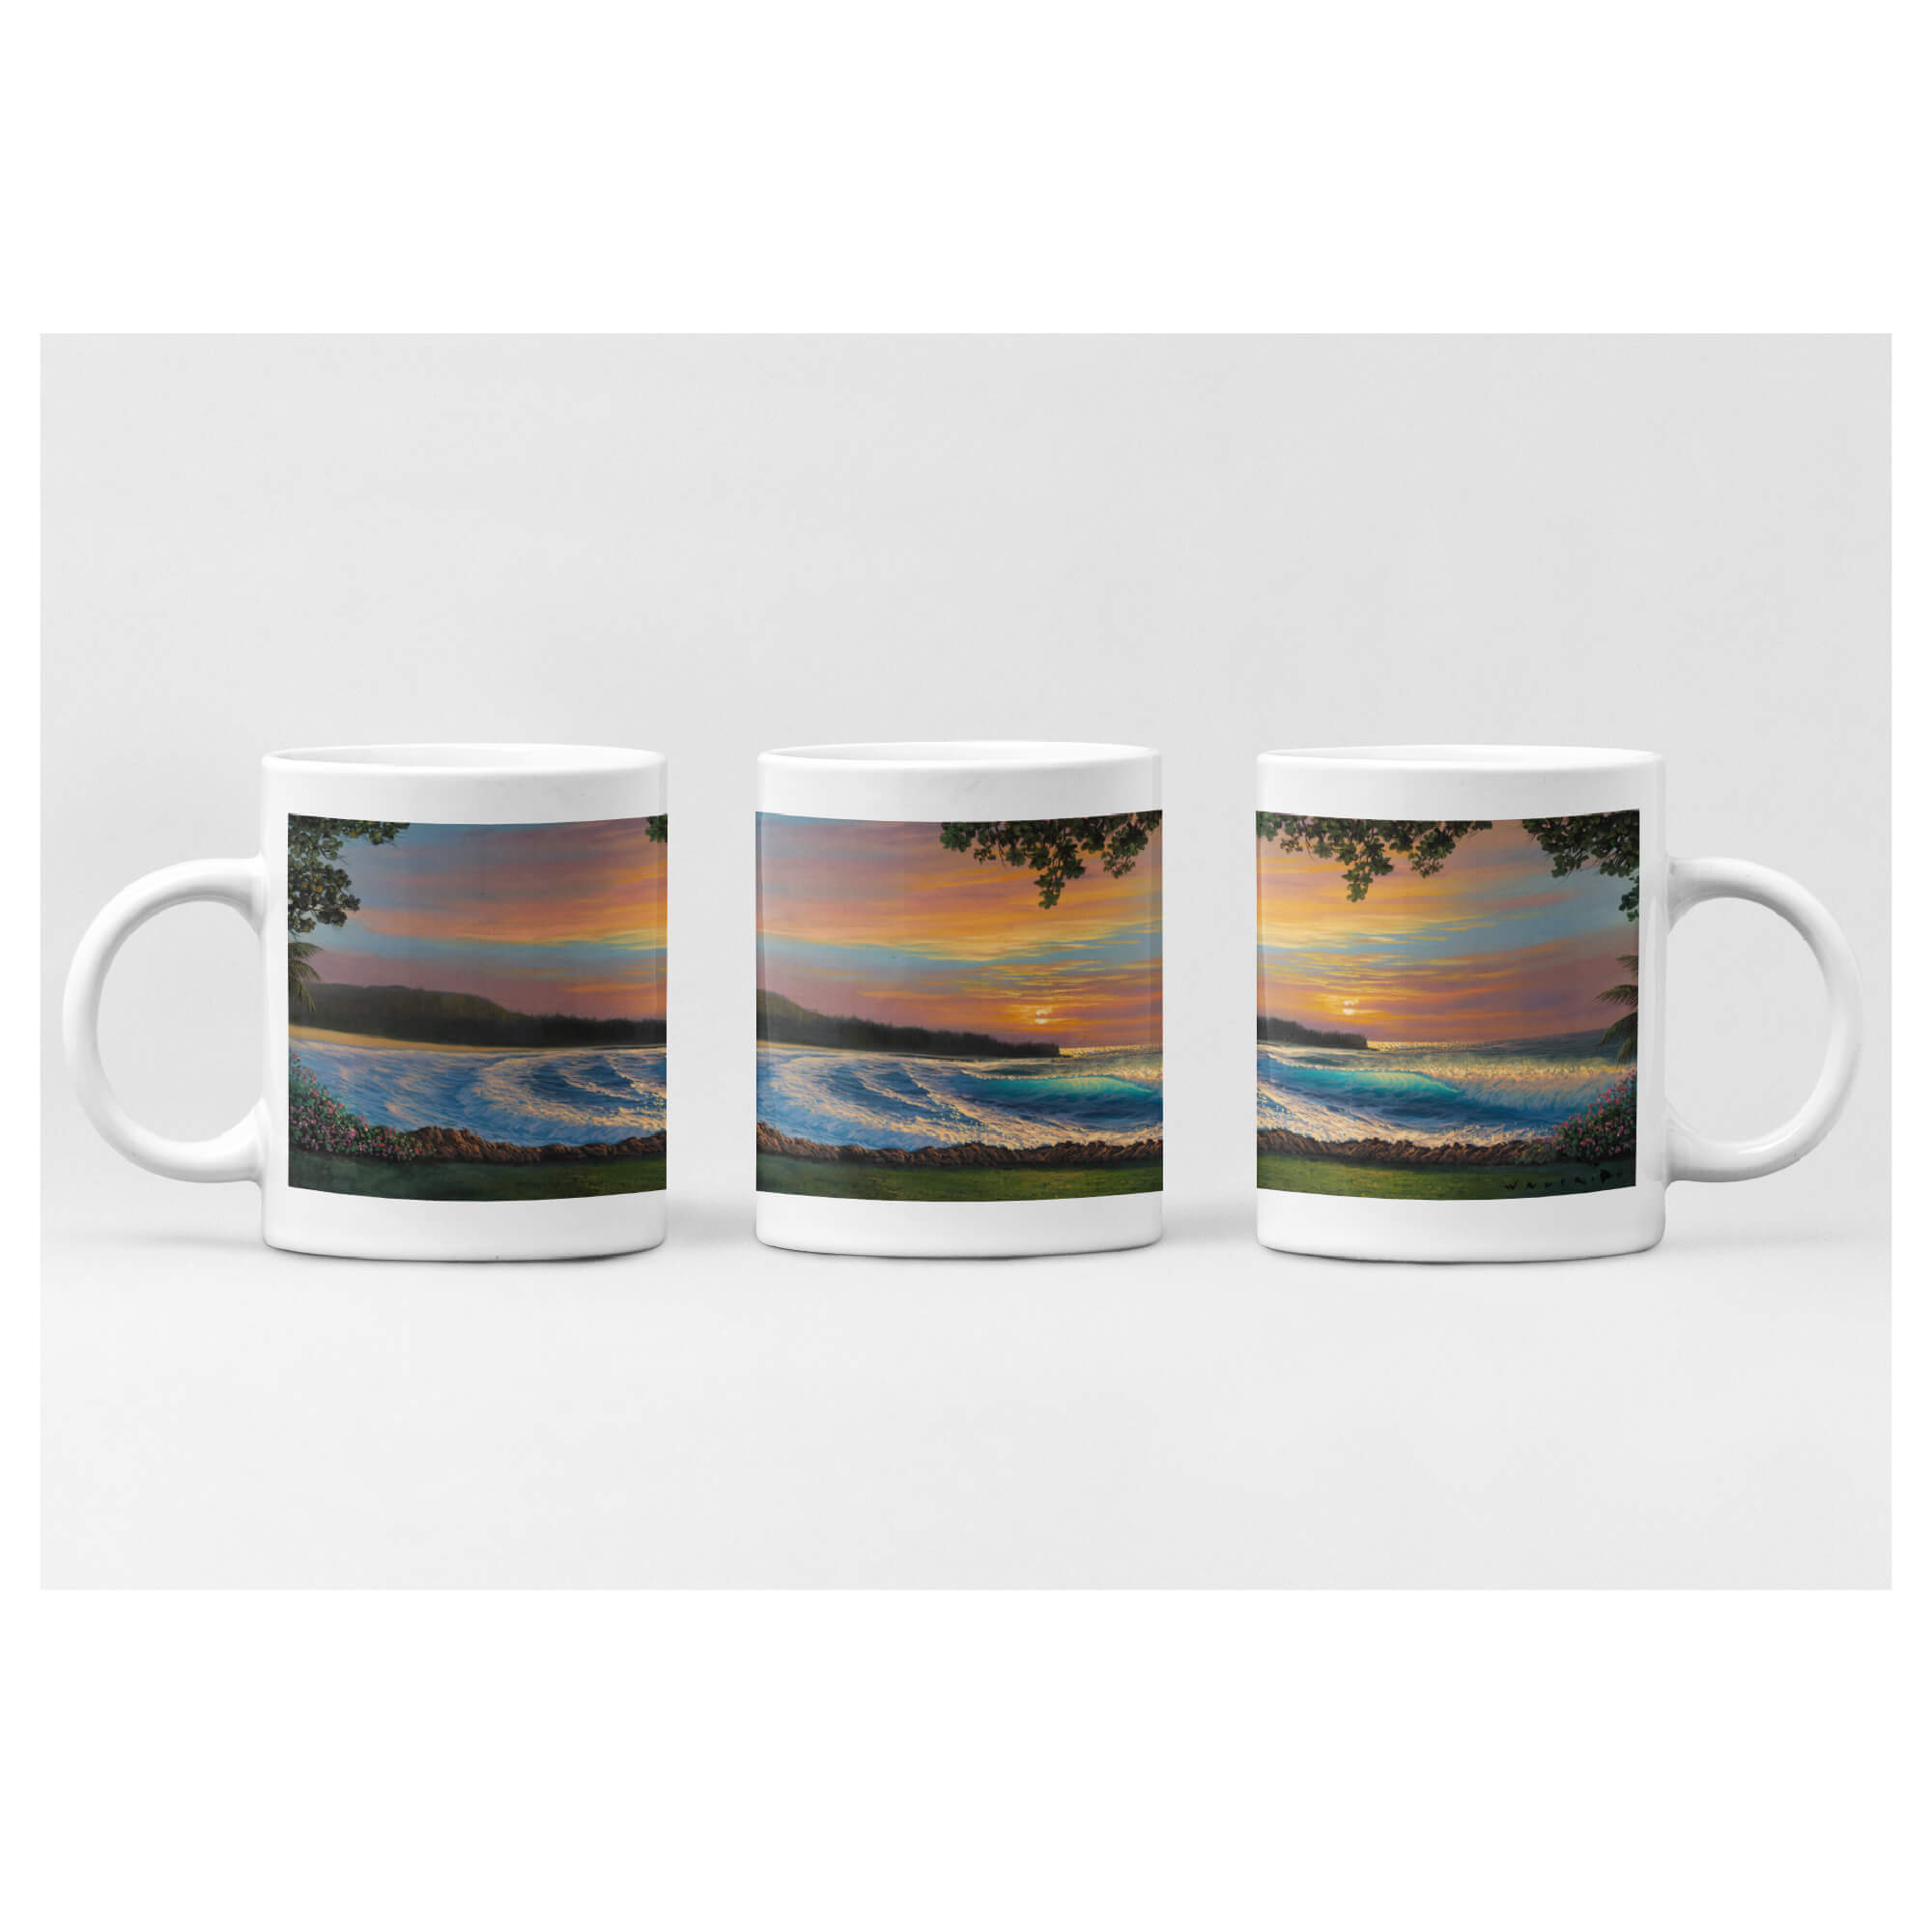 Ceramic mug featuring a beautiful view of the tropical scenery at Turtle Bay Resort on the island of Oahu by Hawaii artist Walfrido Garcia